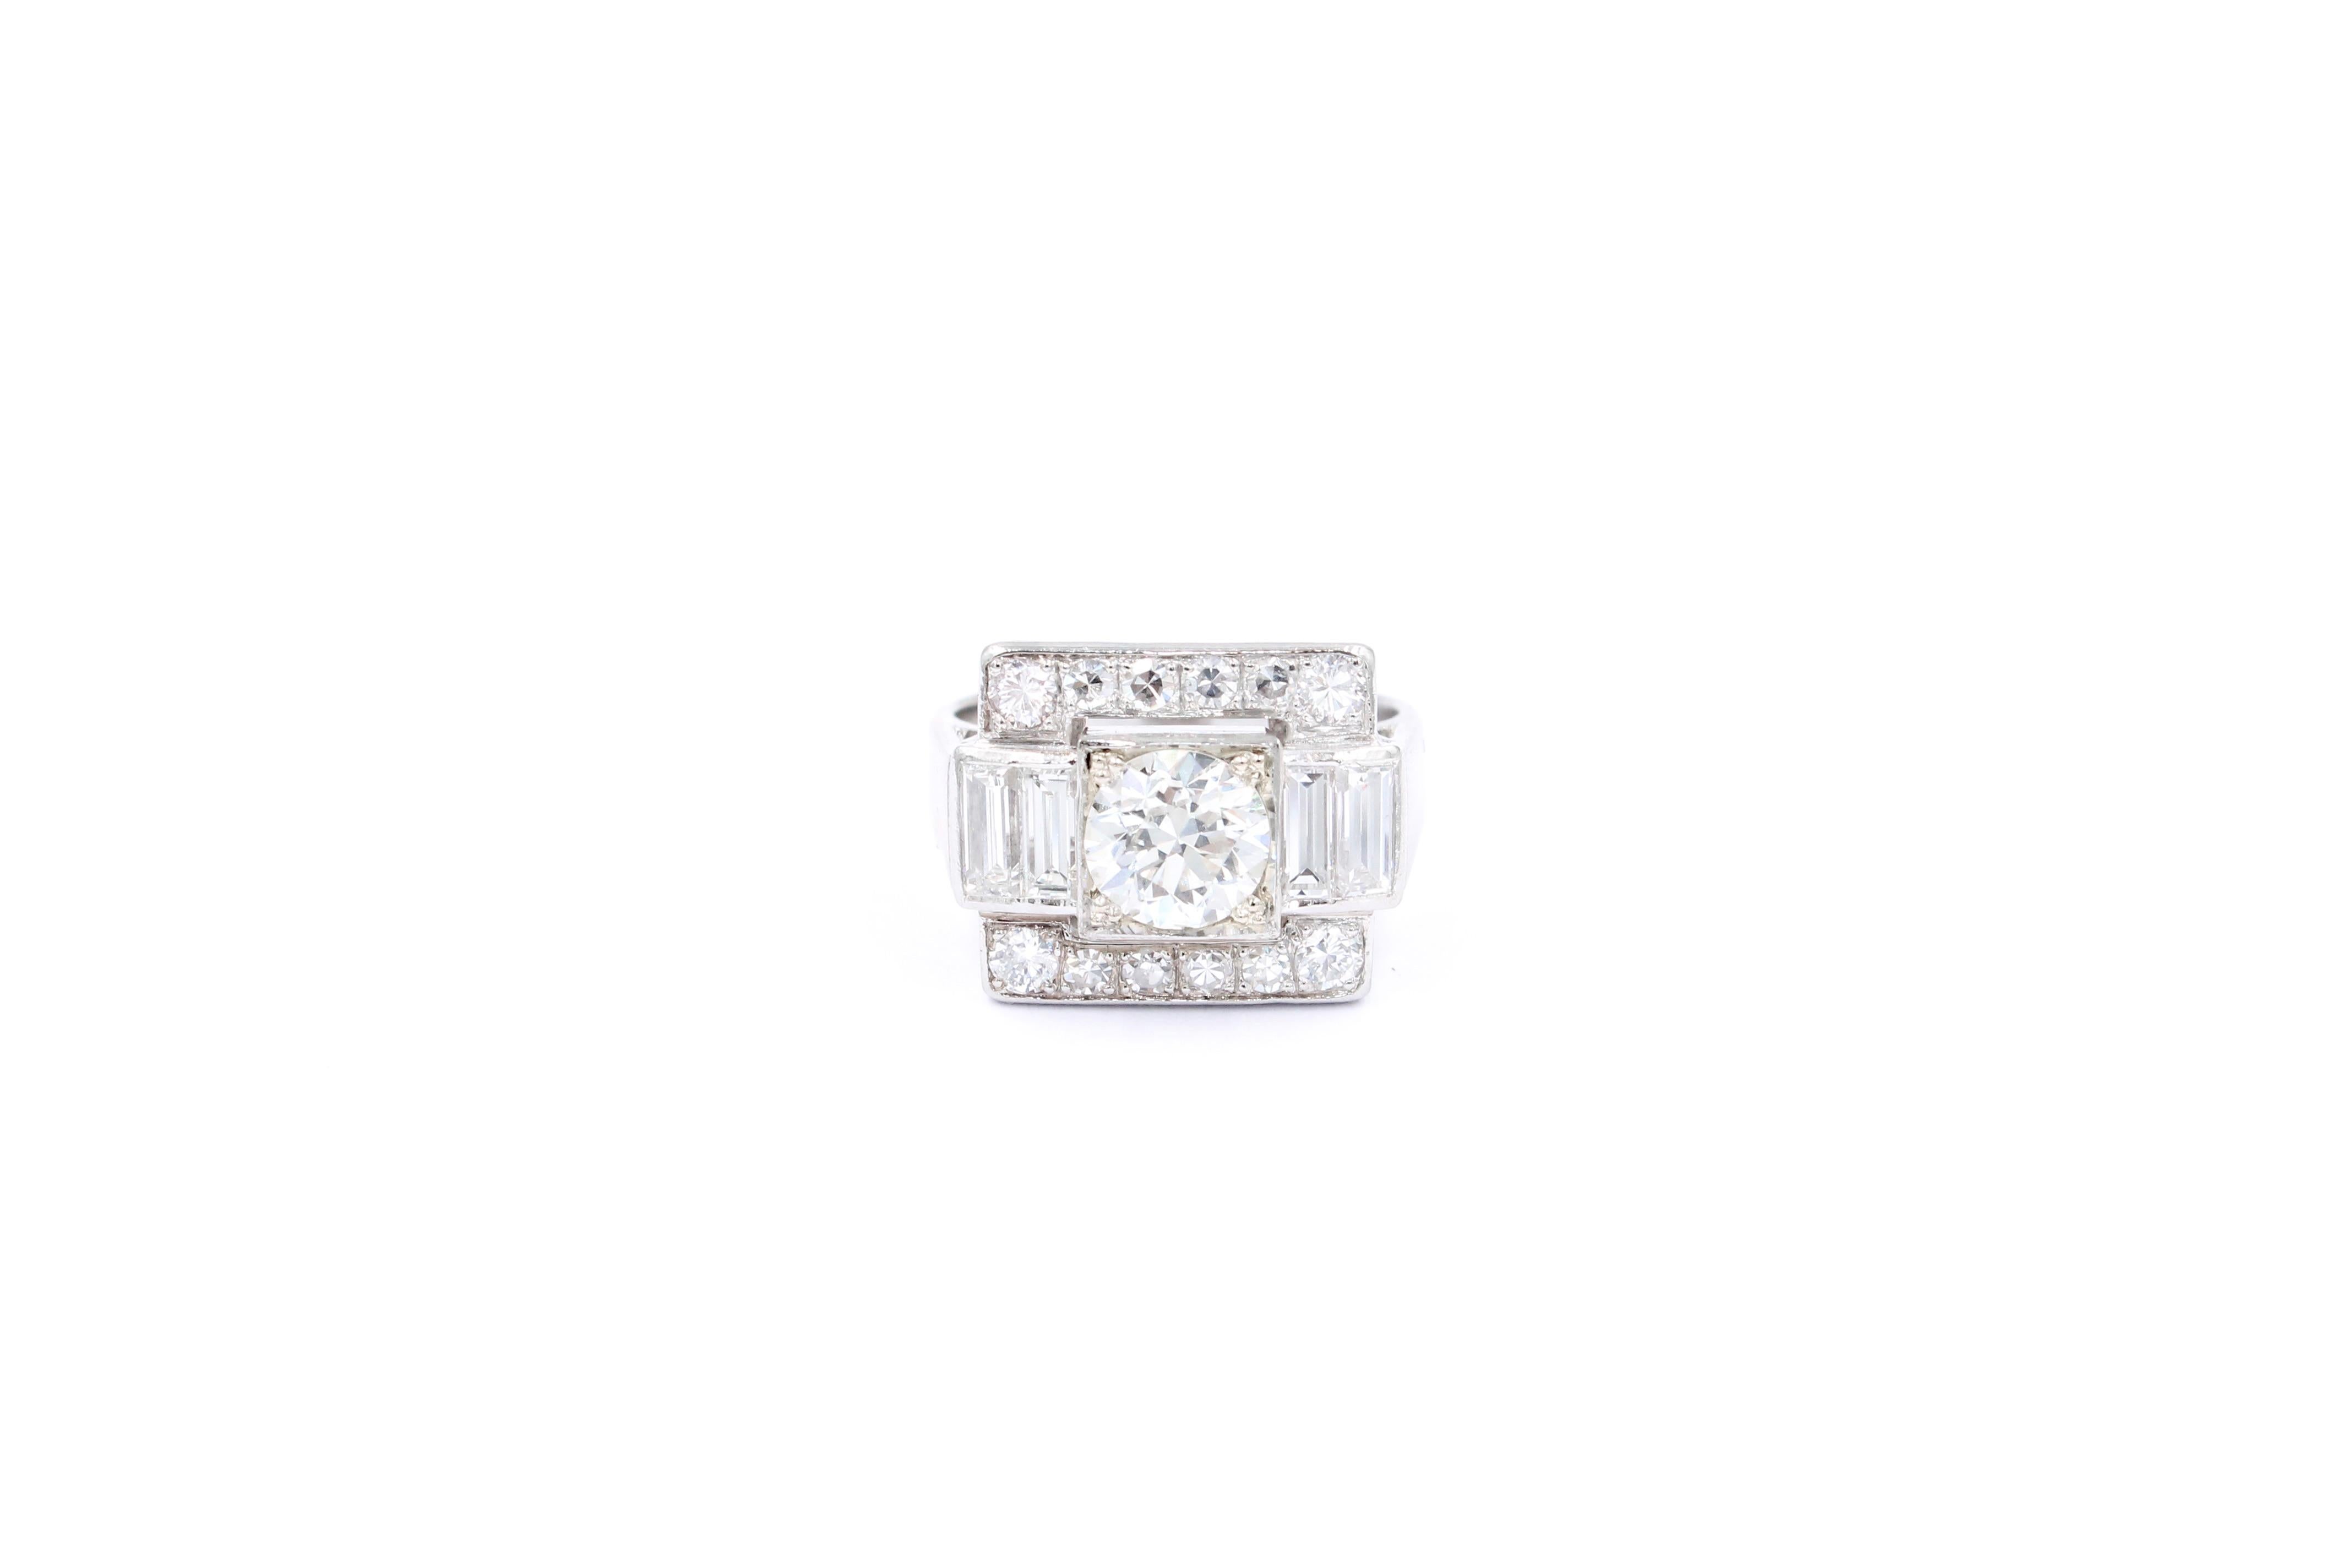 Unique squared Vintage ring circa 1950 in perfect condition. 

The ring is made of white gold 18 Karat. 

The ring is set with a center modern curt diamond of 1.08 Carats ( estimated H color - Vs clarity), 4 baguette shape diamonds for a total of